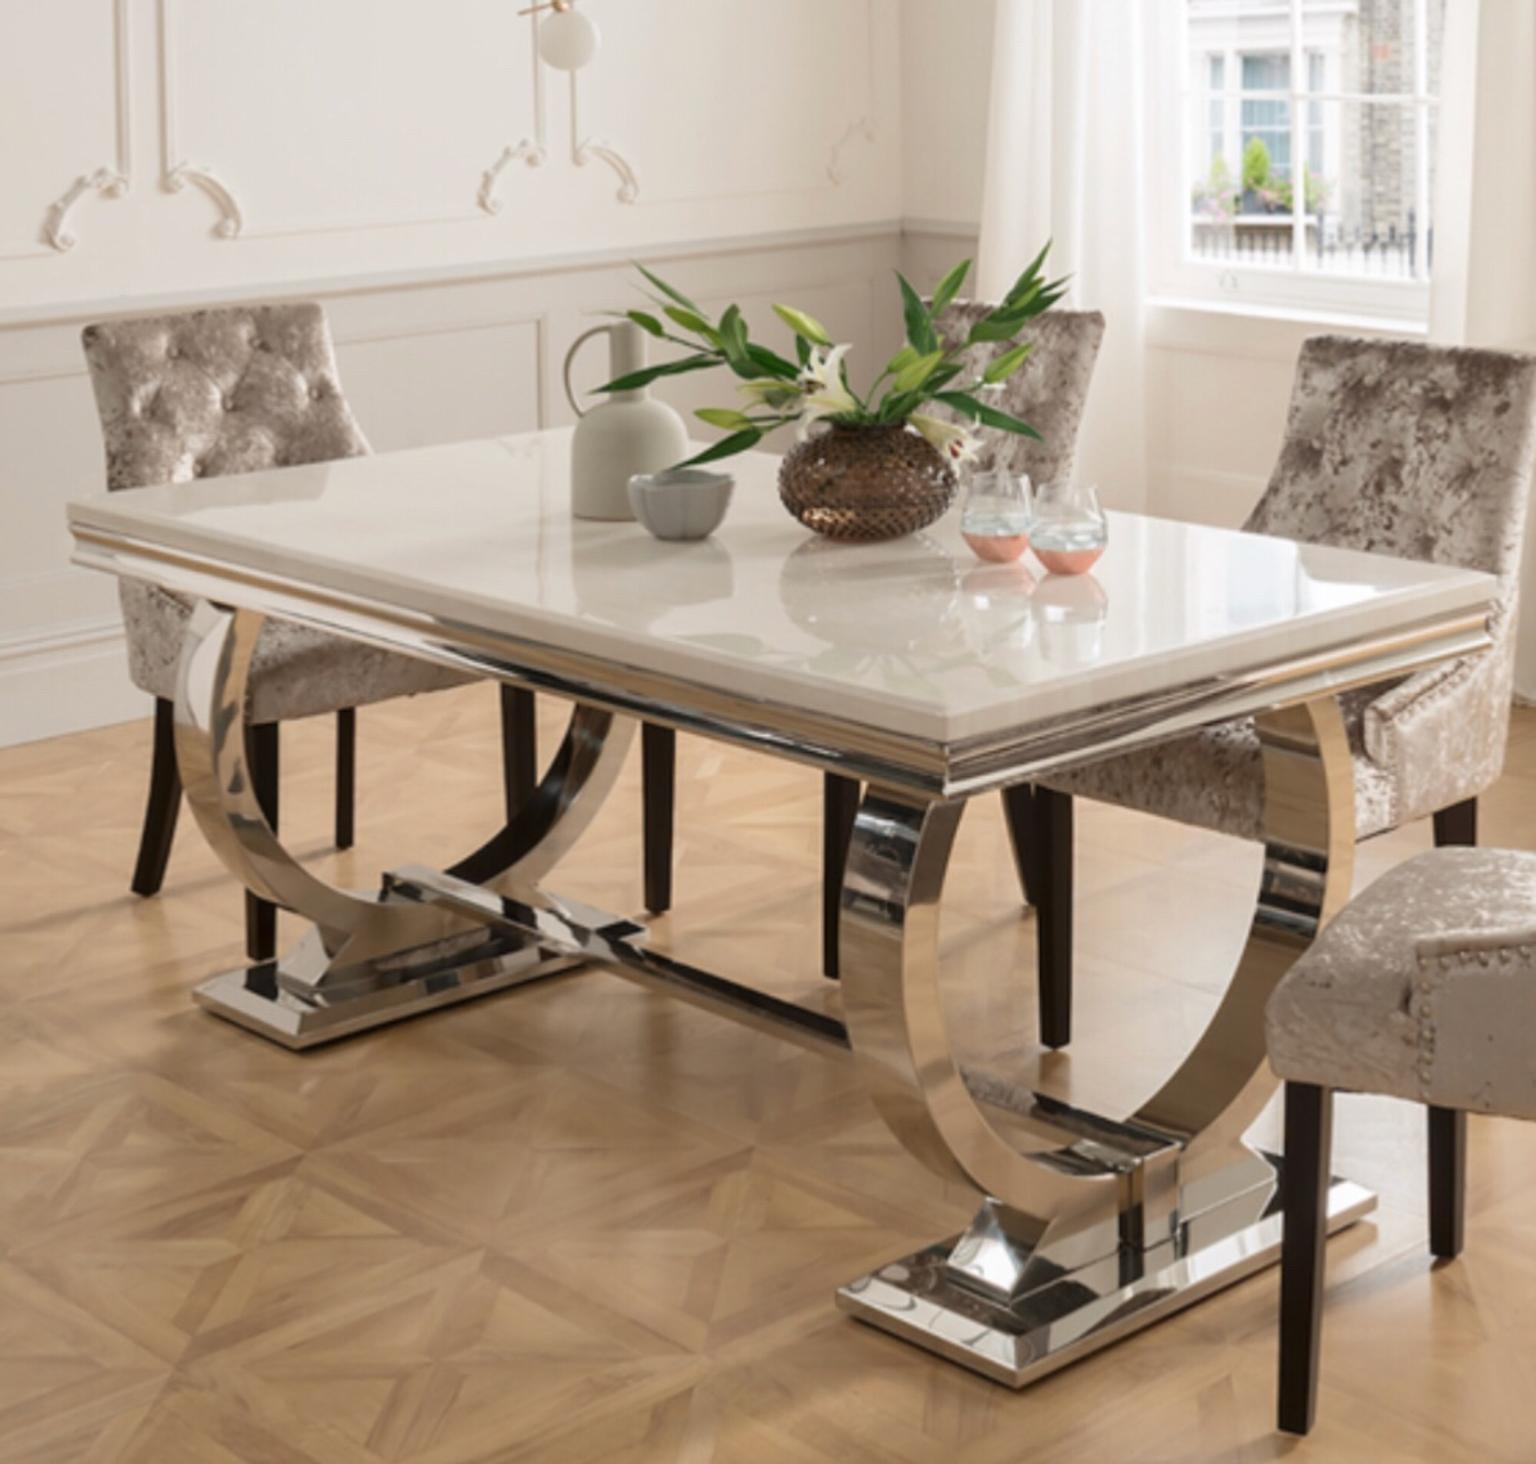 Cream marble dining table 6 seater in TW16 Spelthorne for £400.00 for